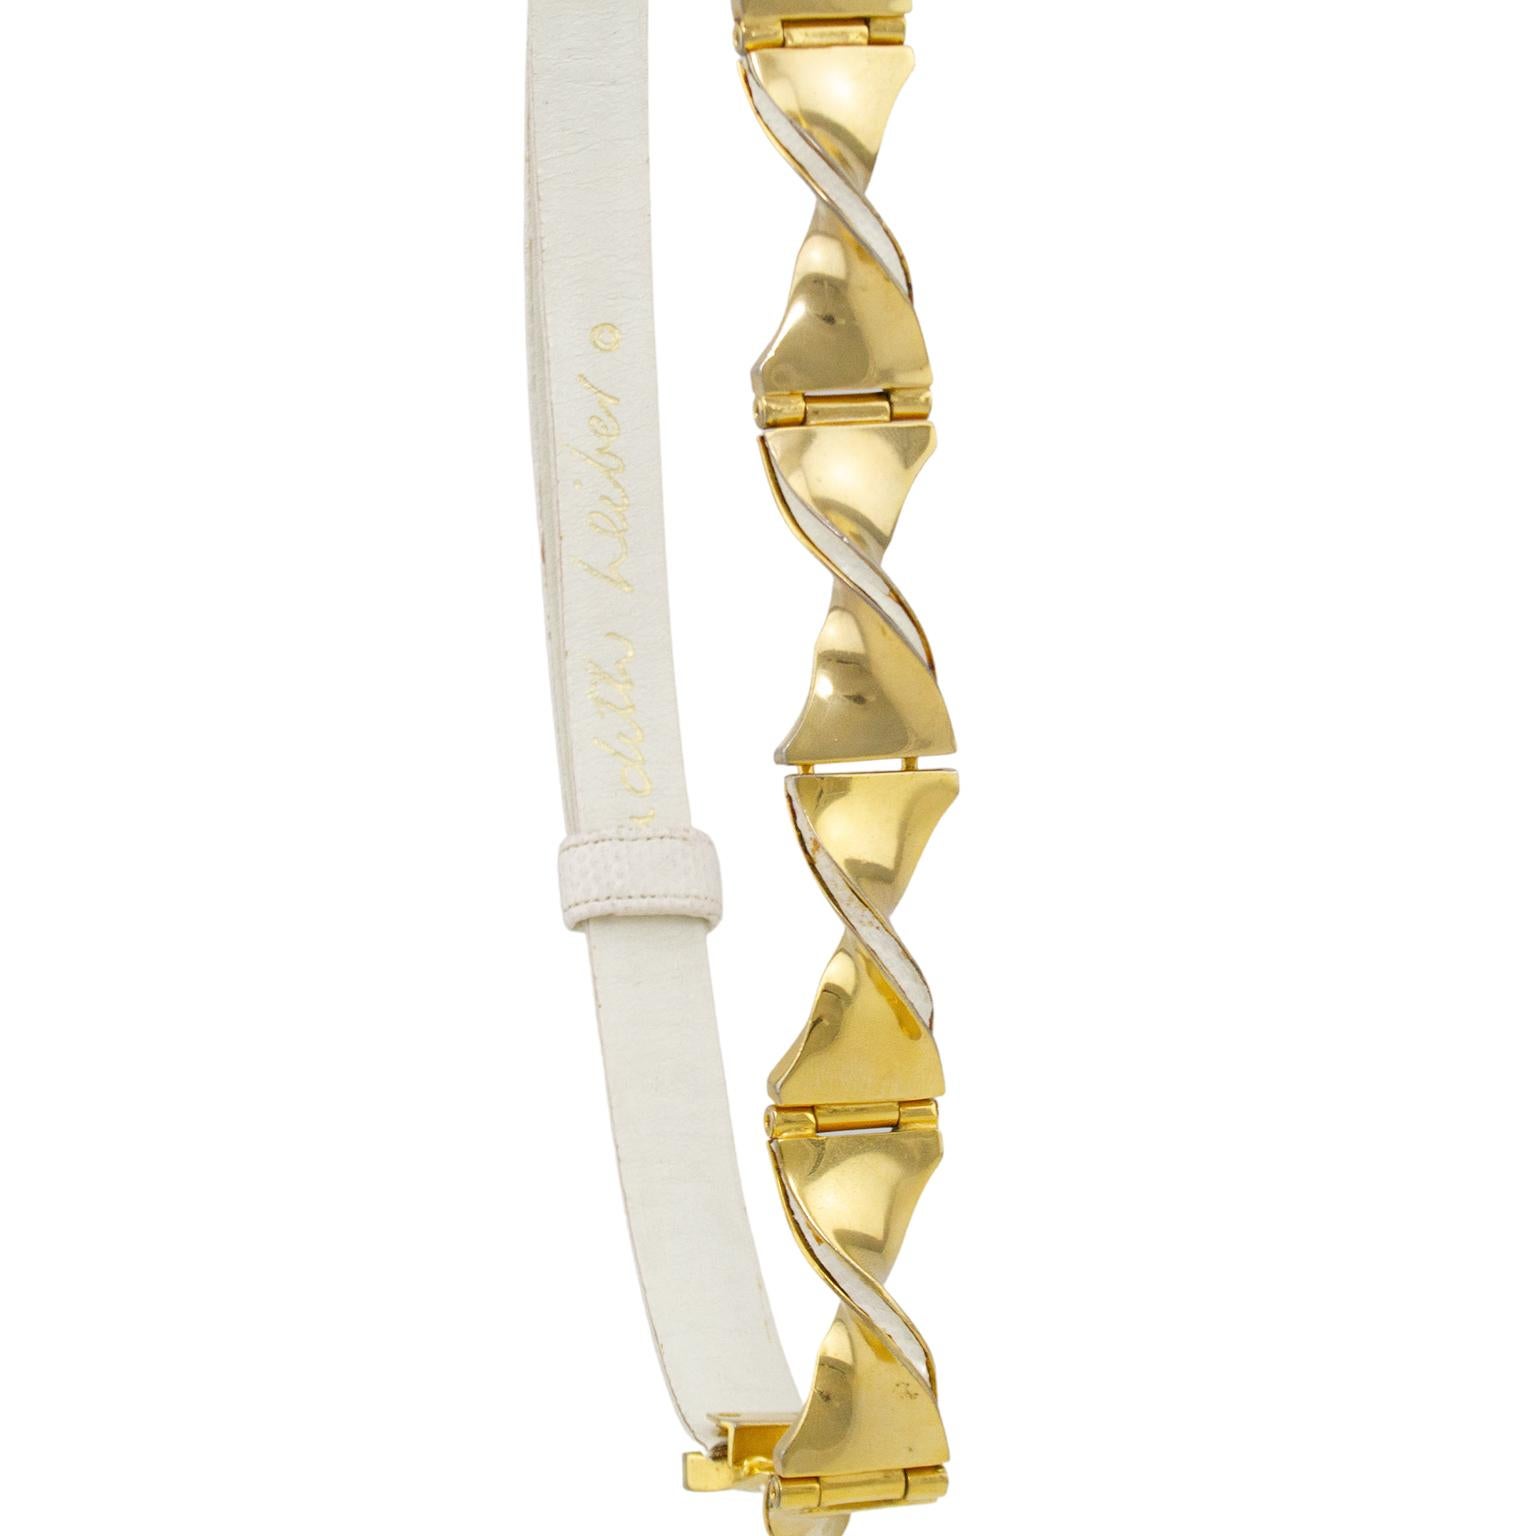 1980's Judith Leiber belt. White patterned leather with gold tone twisted details across the front. Adjustable to be worn at waist or at hips. Gold Judith Leiber logo stamped on interior white leather lining. Excellent vintage condition. Fits from a